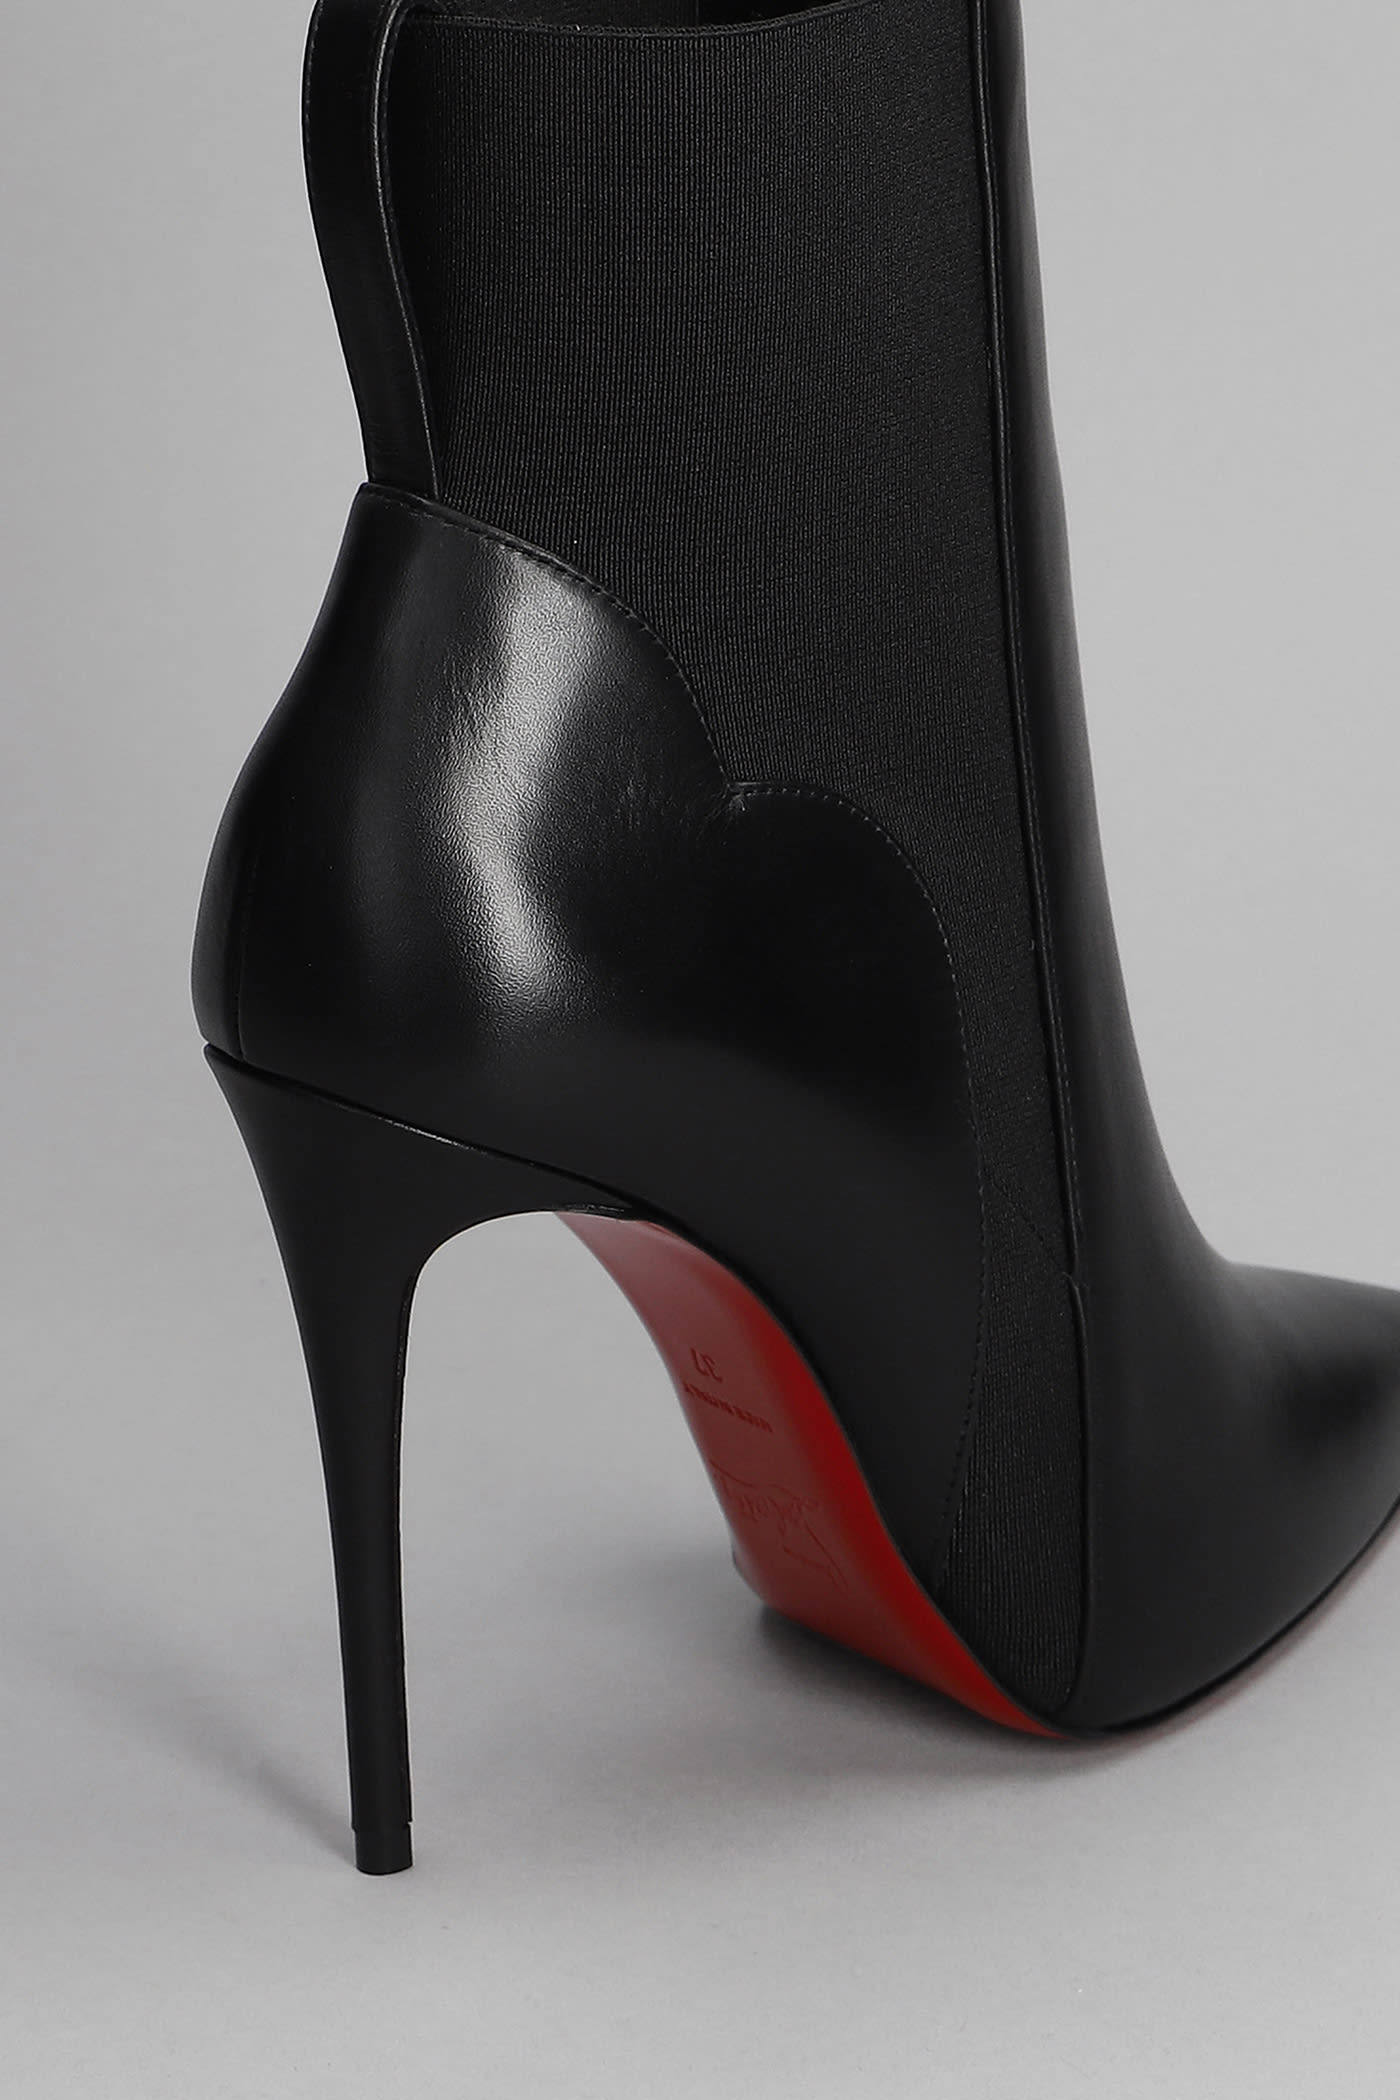 Christian Louboutin Chelsea Chick Red Sole Stiletto Booties